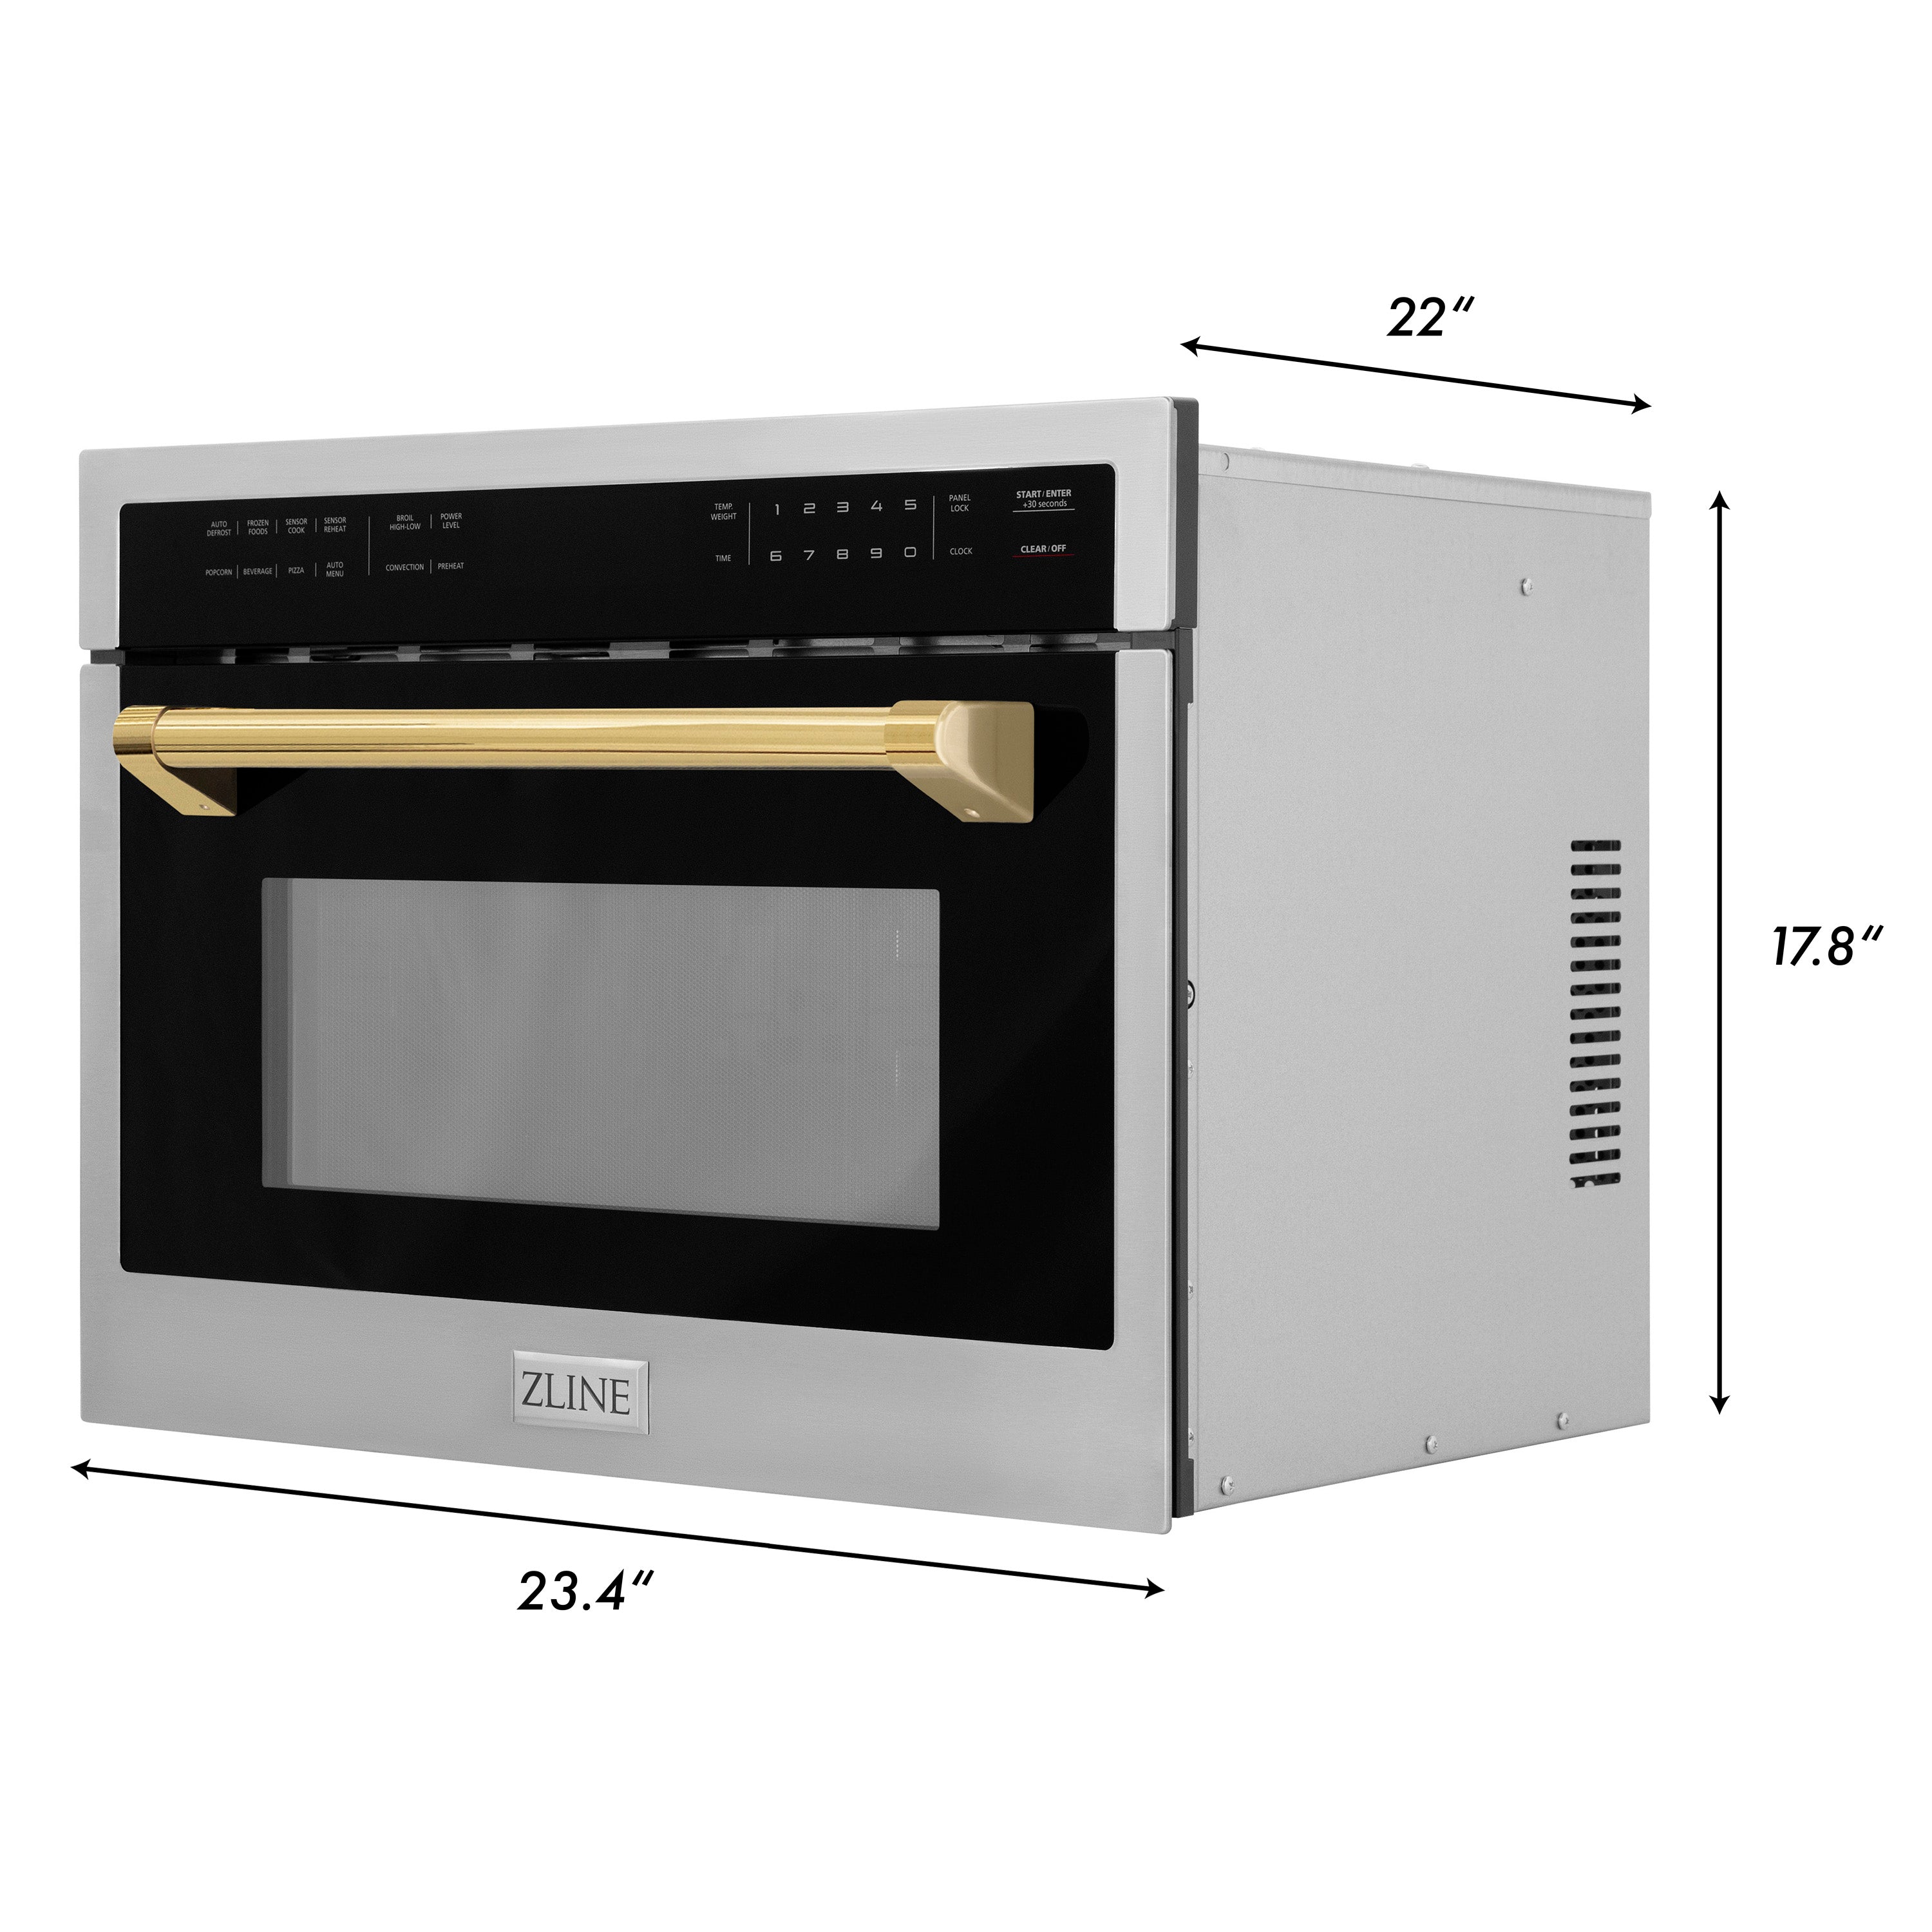 ZLINE Autograph Edition 24" 1.6 cu ft. Built-in Convection Microwave Oven in Stainless Steel and Gold Accents (MWOZ-24-G) - New Star Living